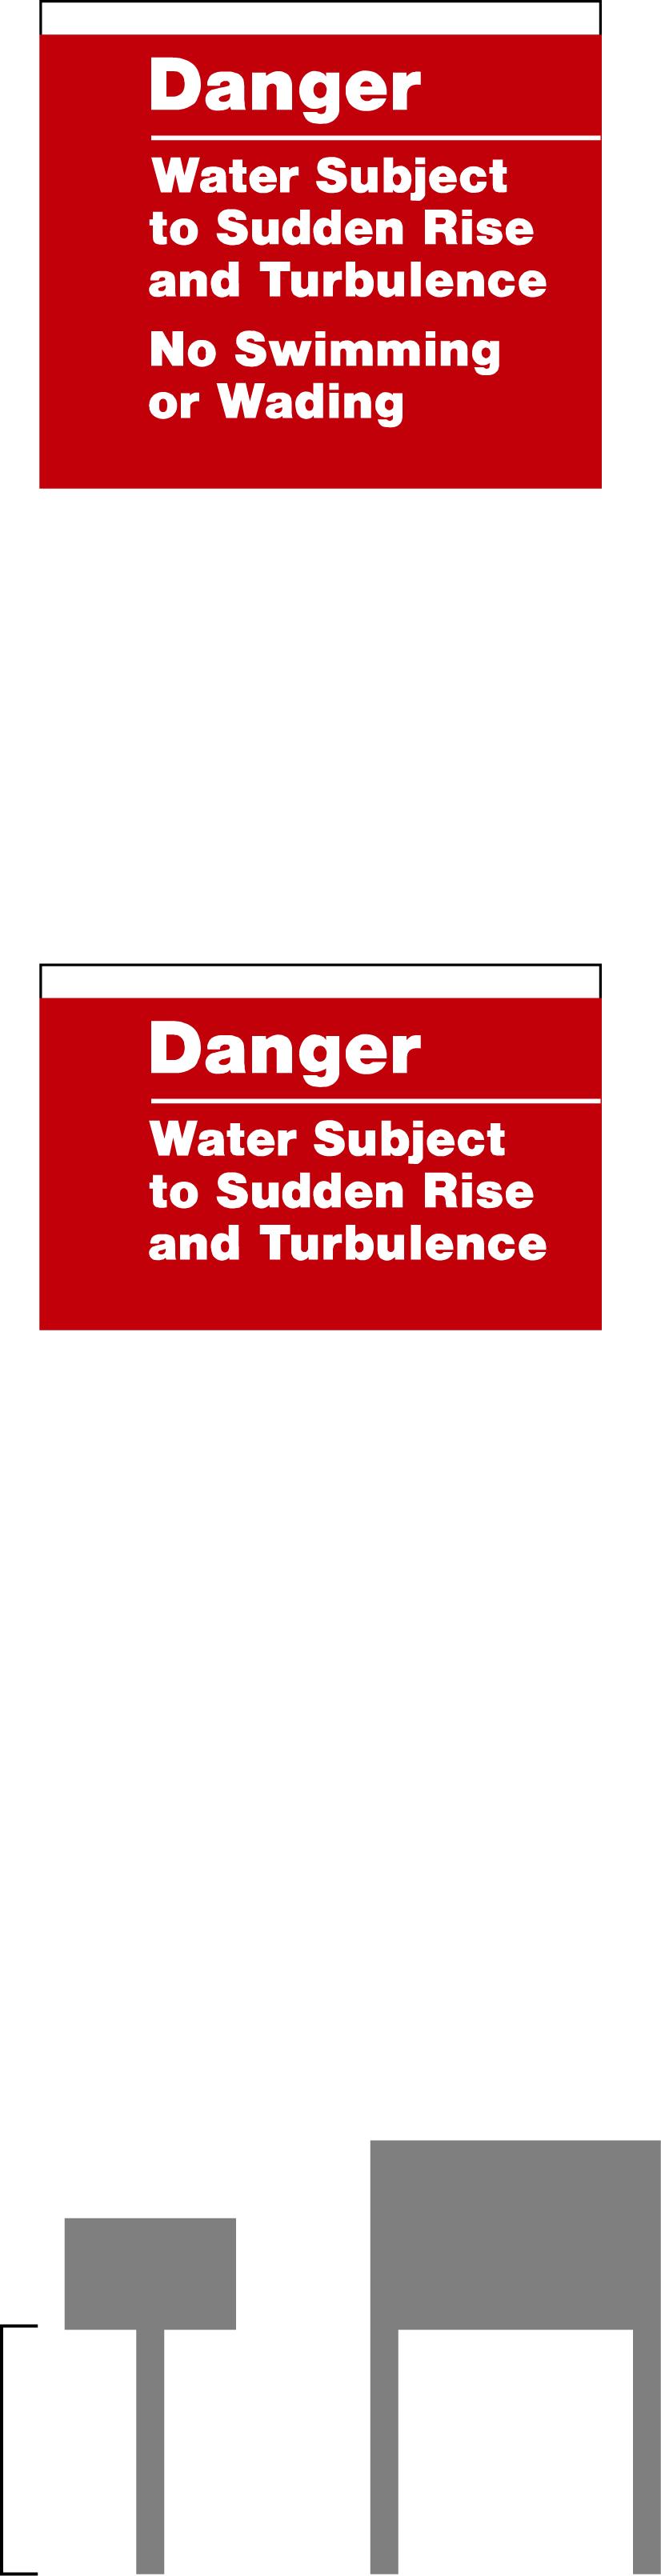 Danger: Water Subject to Sudden Rise EP 31016a These signs are specified for use along the shoreline below the dam for viewing by pedestrians.